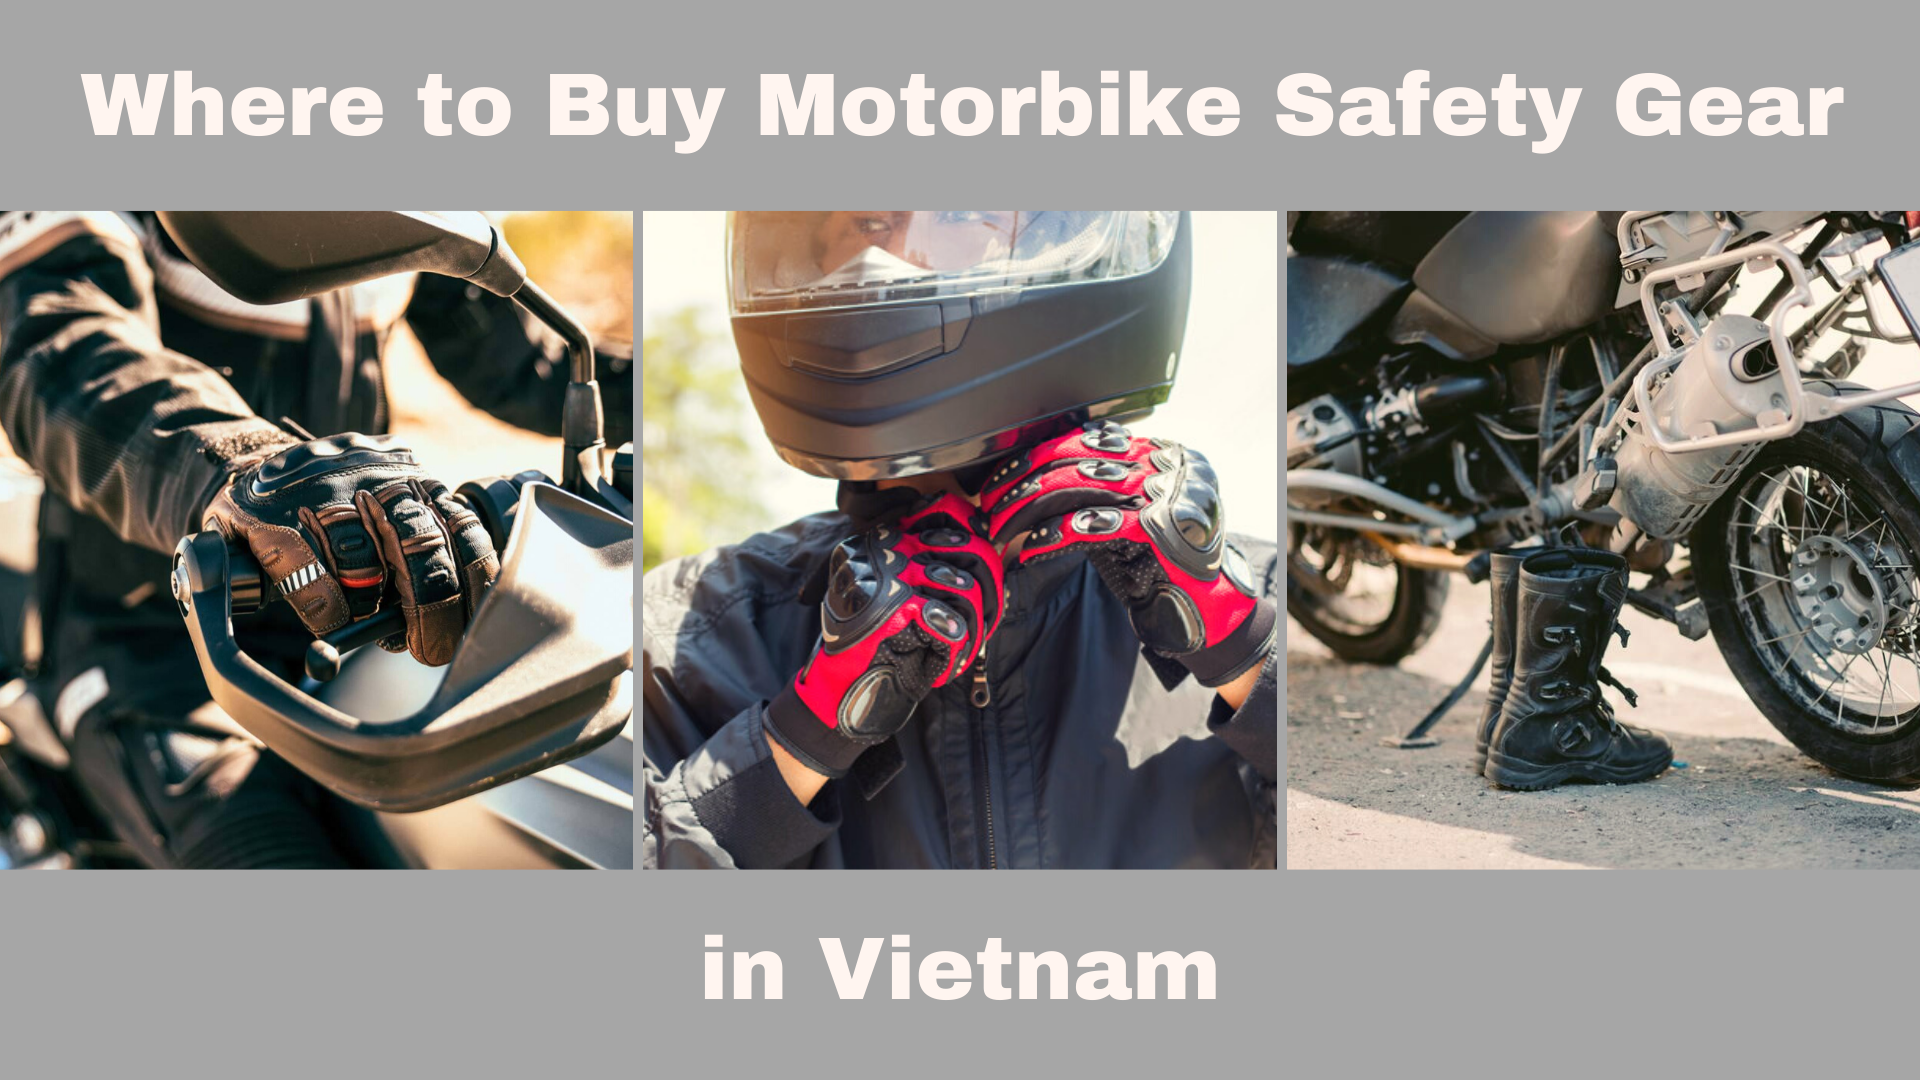 Motorcycle Safety Gear Guide